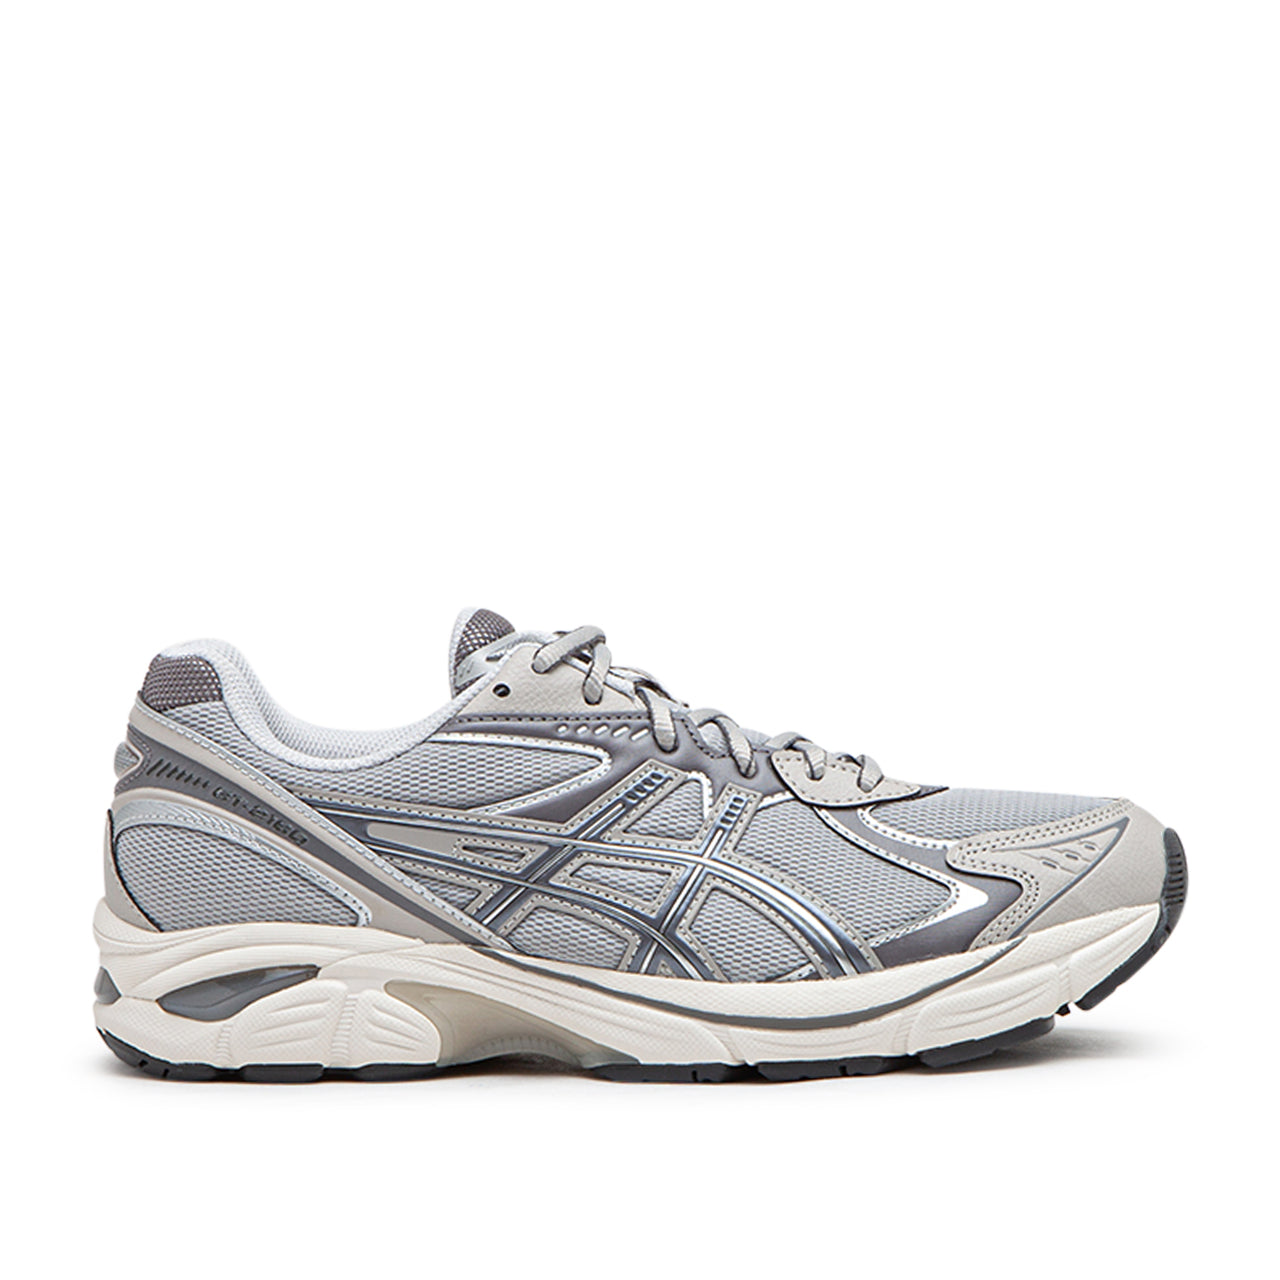 Asics GT-2160 (Grey / Silver) 1203A320-020 - Allike Store